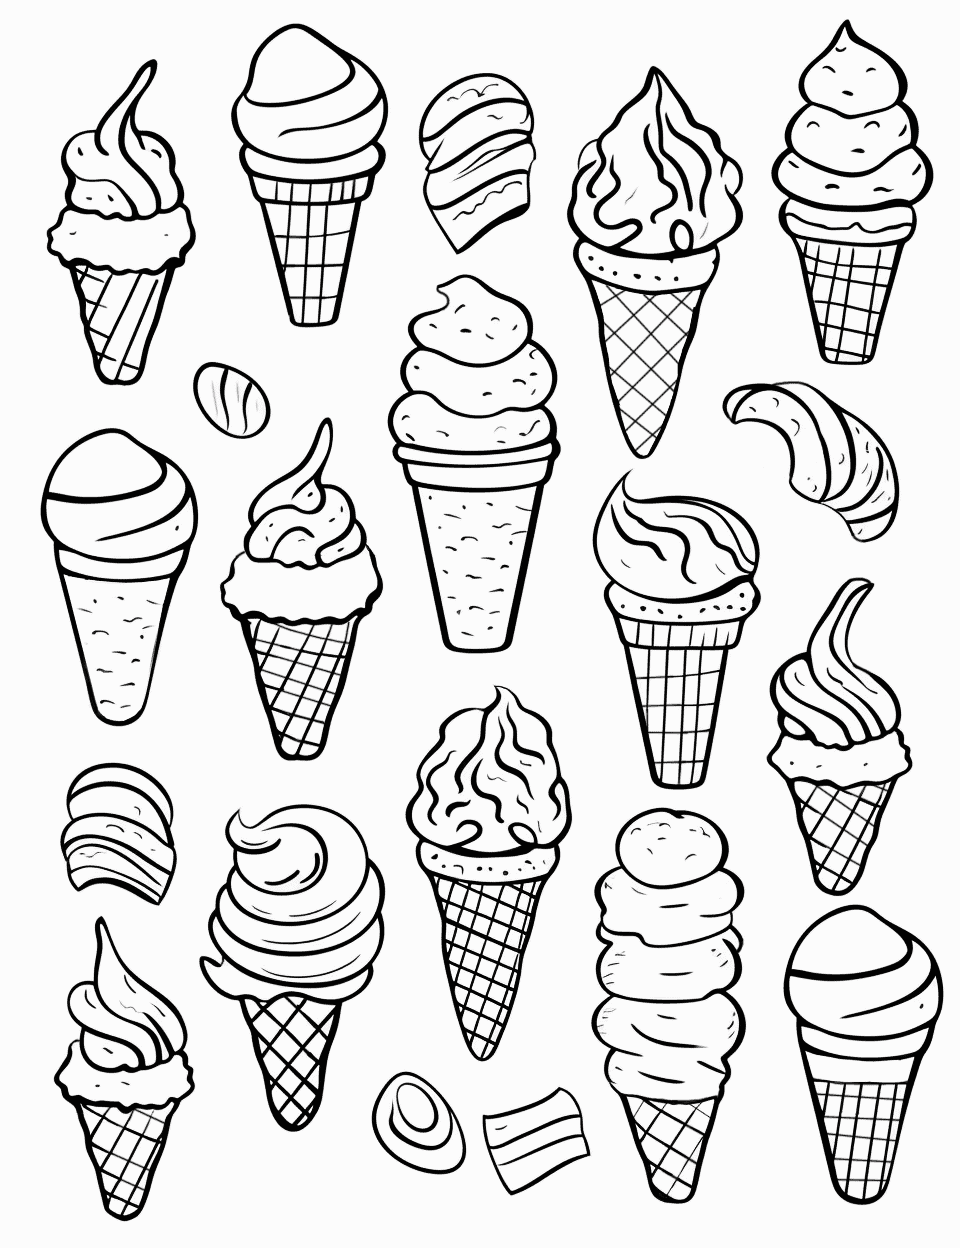 Ice Cream Doodles Coloring Page - Random doodles of ice cream treats, cones, and toppings.